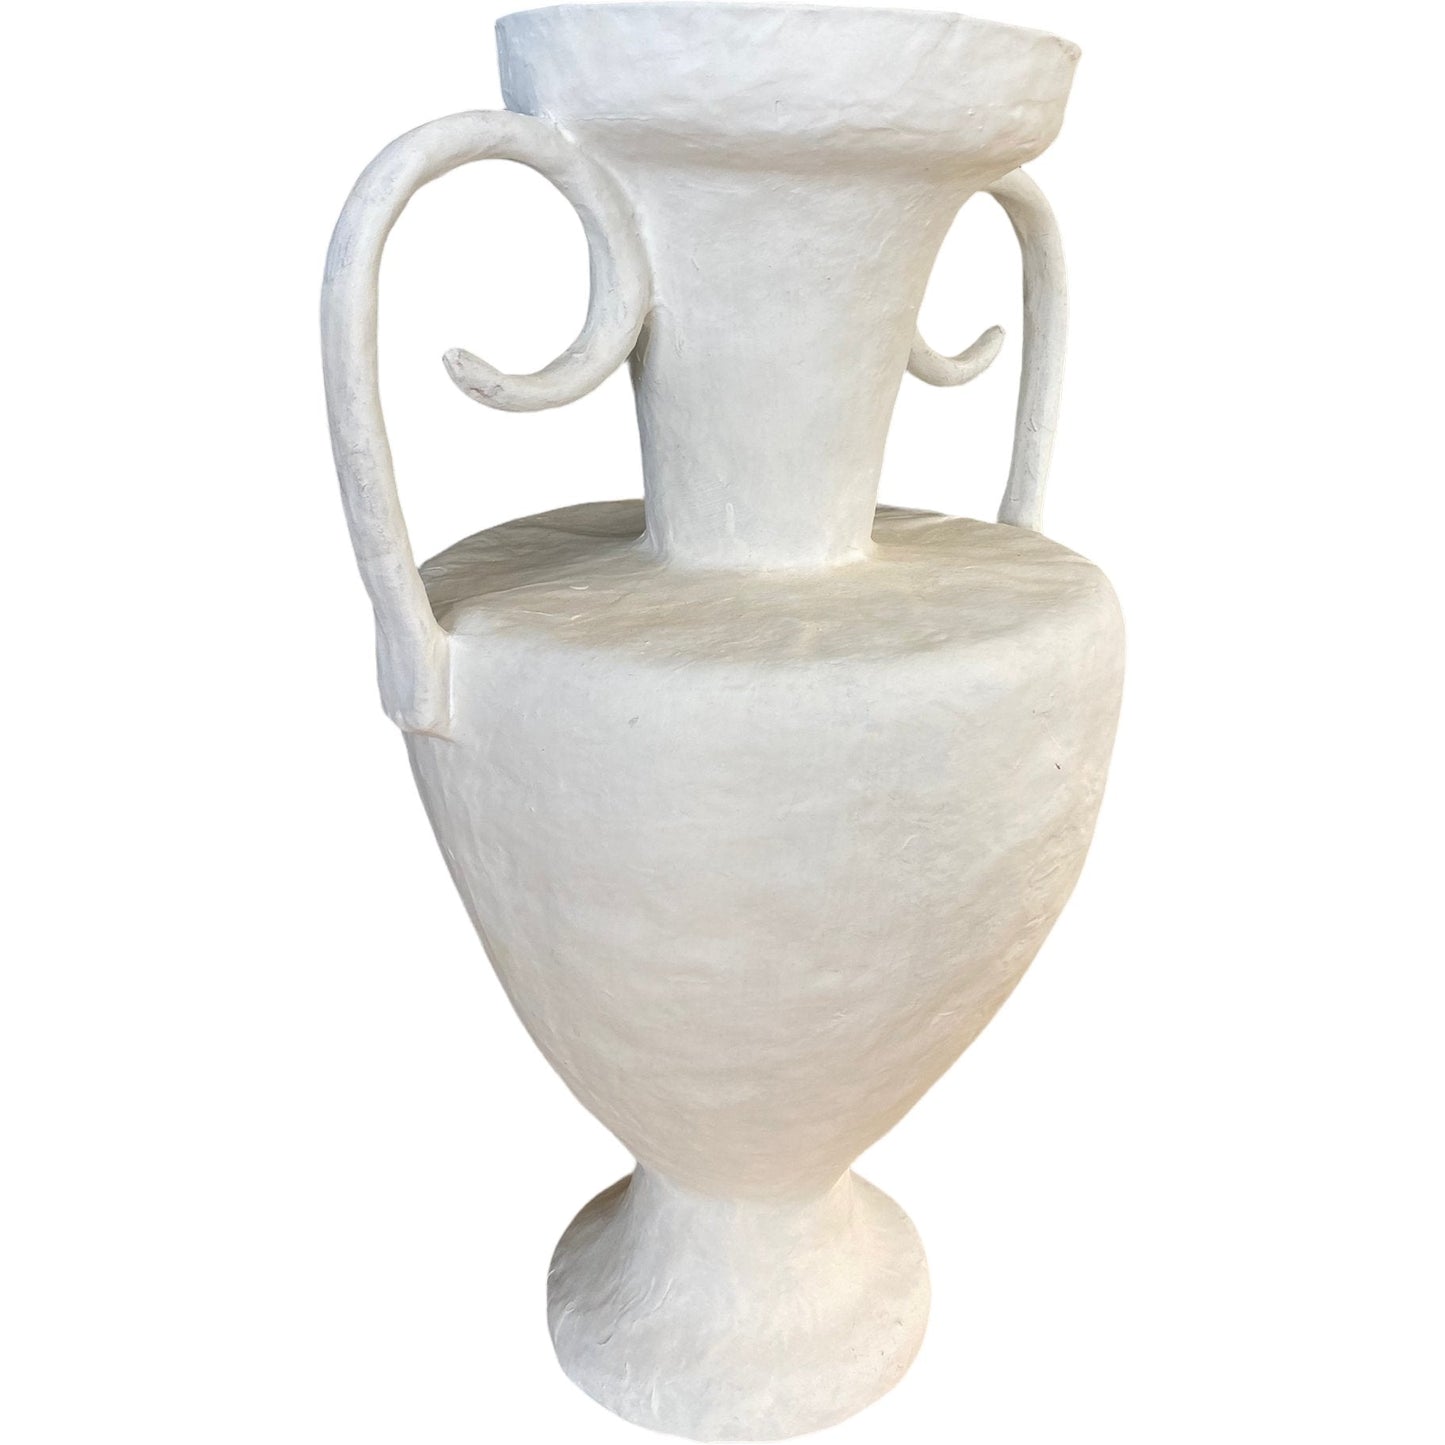 Plaster Paper Mache' Vase with Handles - Curated Home Decor